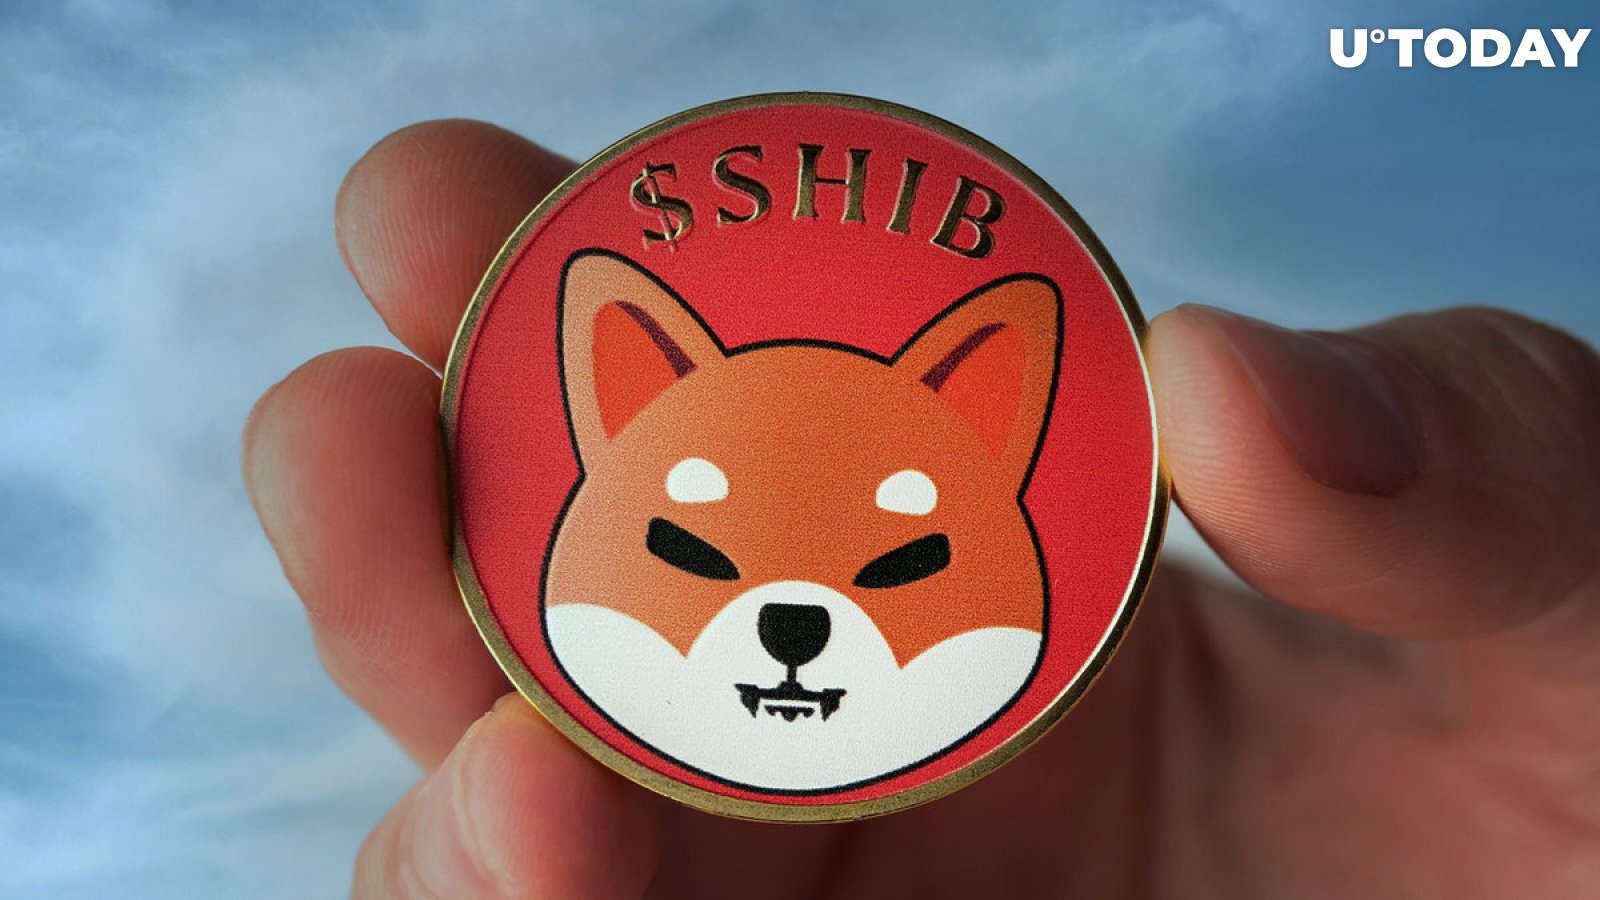 30% of Shiba Inu Holders Are Now Holding for Long-Term Reasons: Report